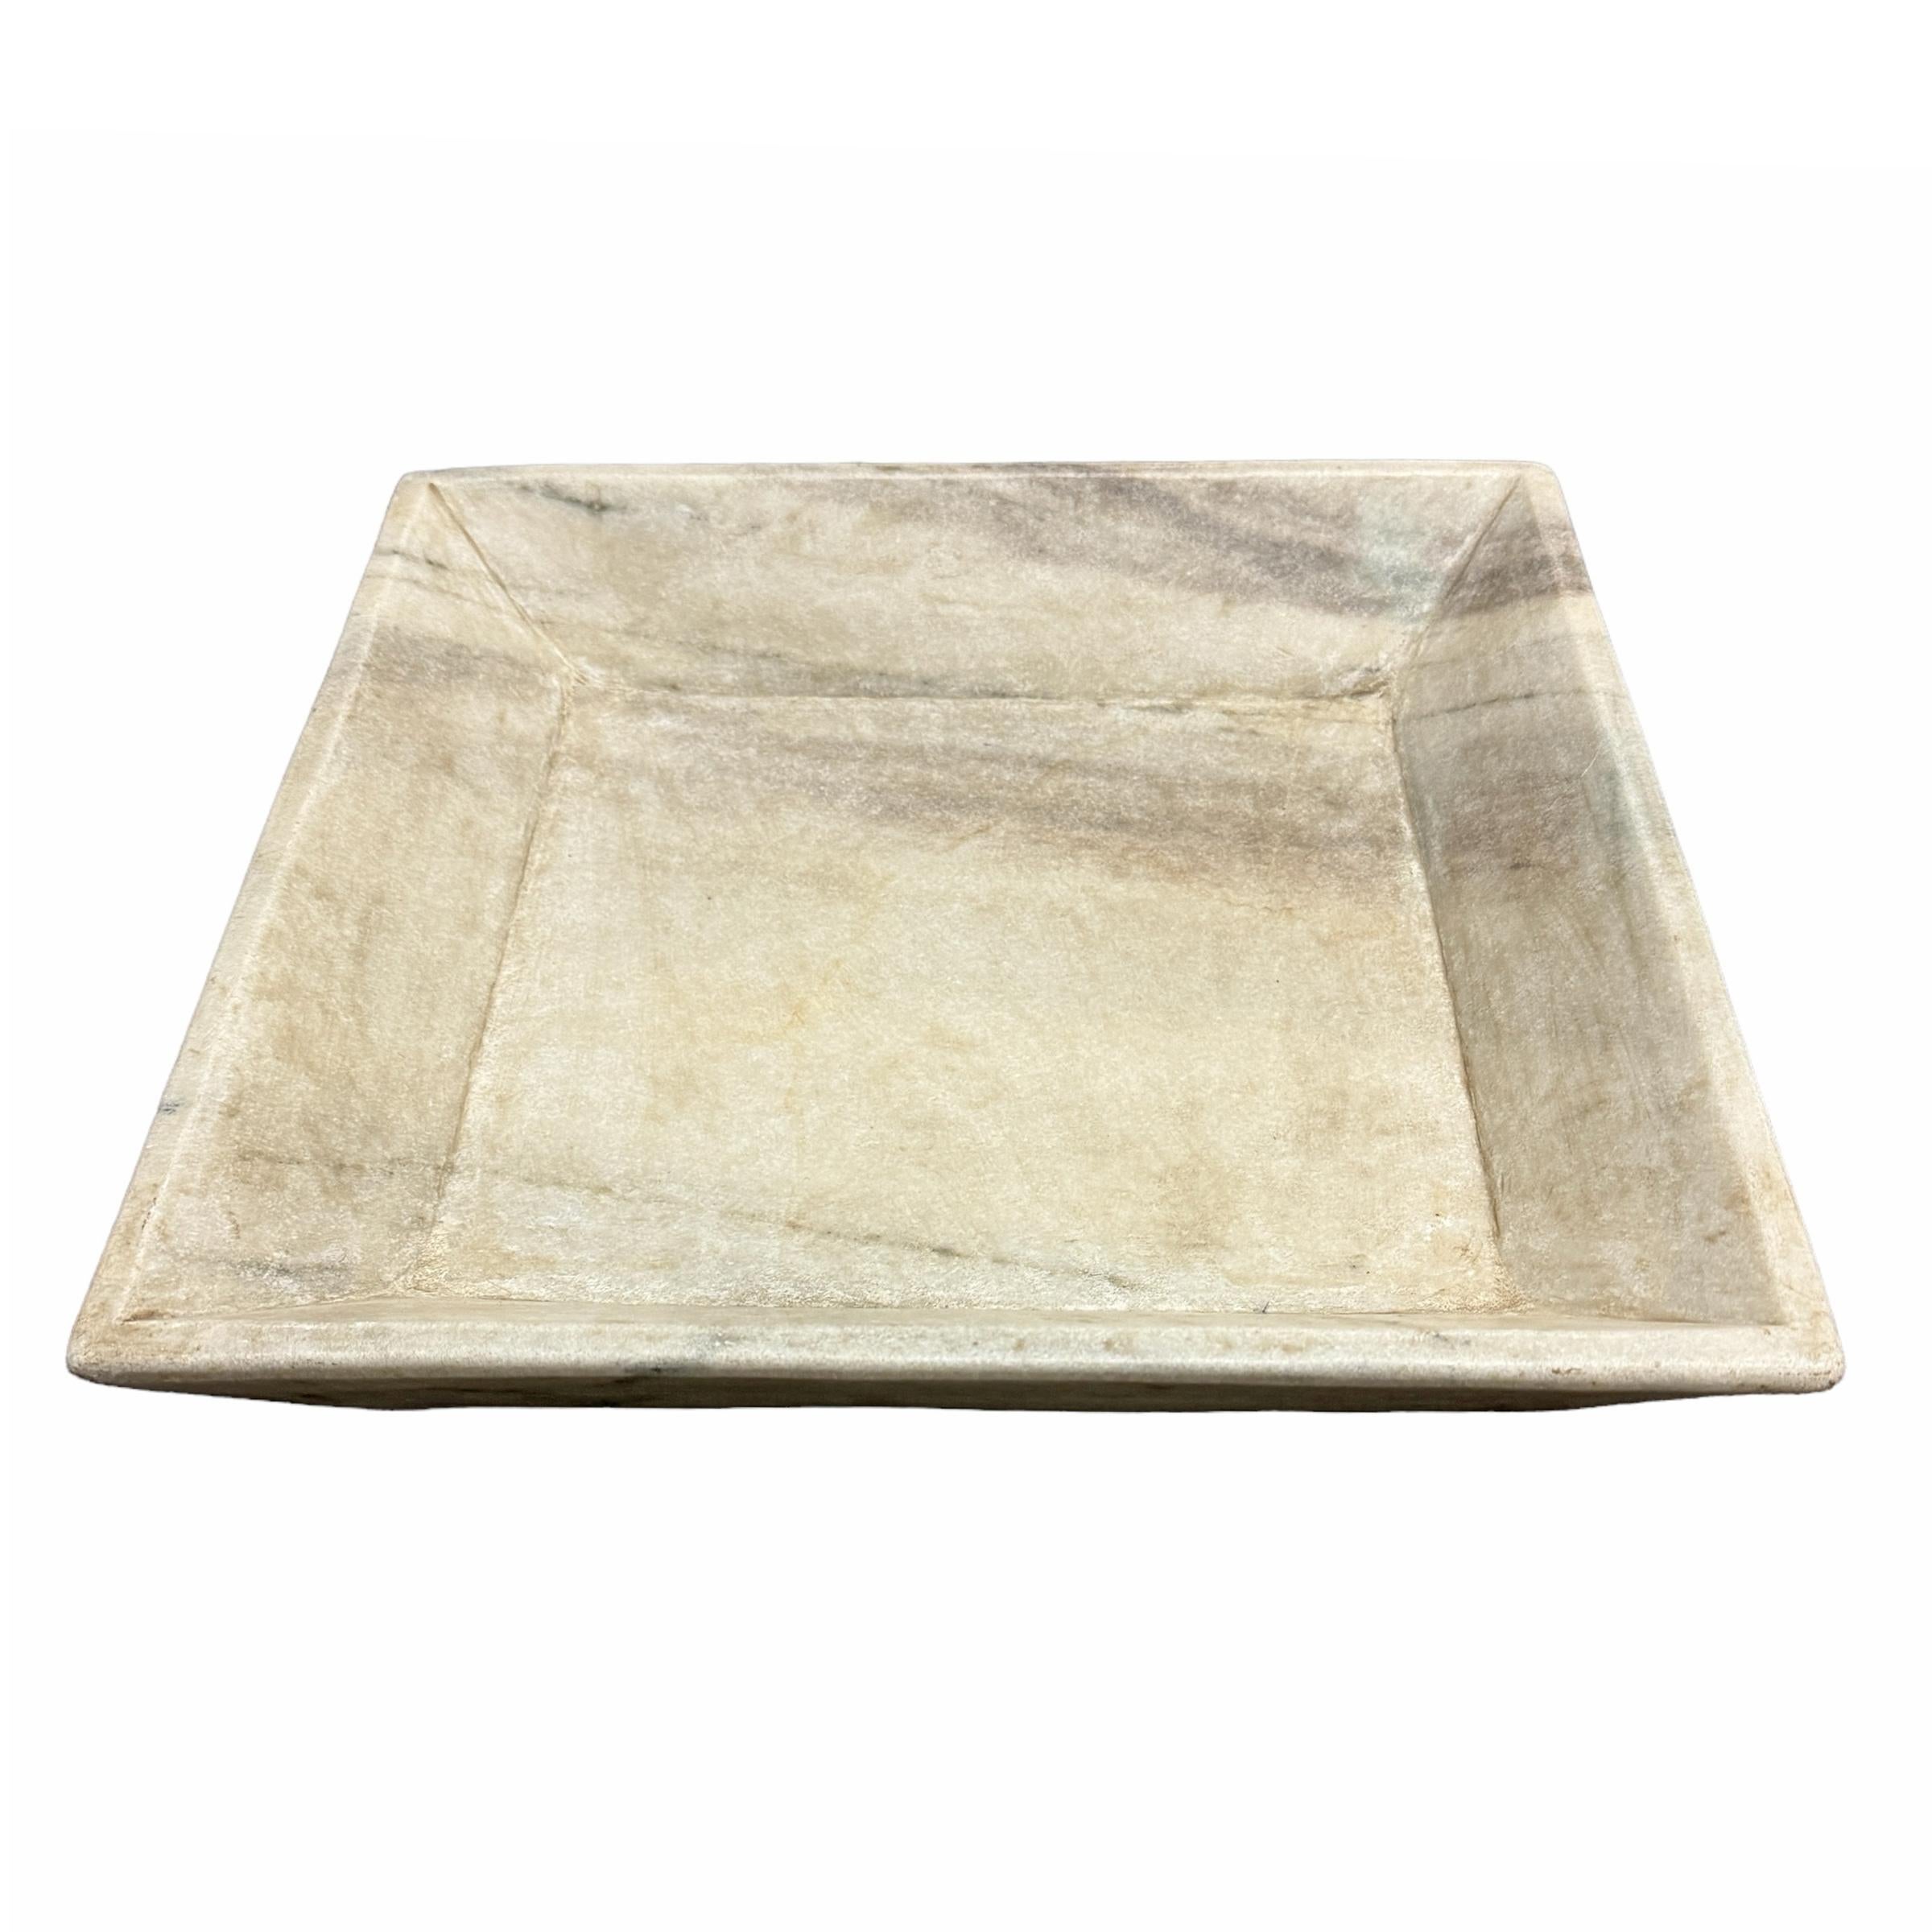 Modern Rather Large Carved Marble Tray For Sale